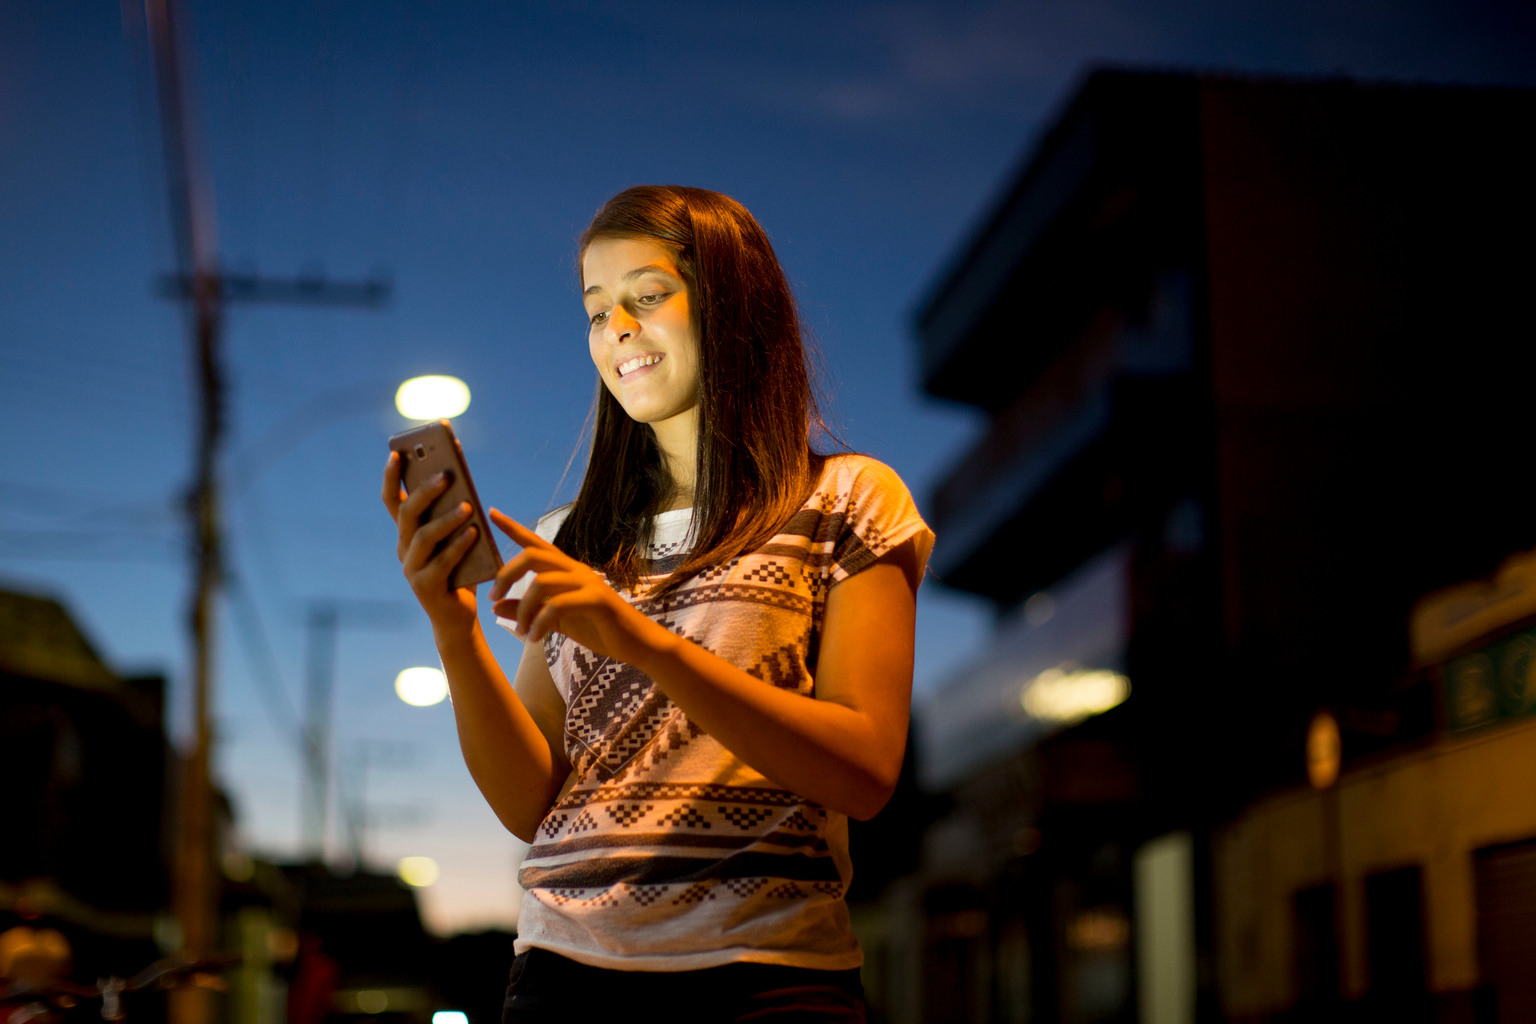 On 30 March 2016, Winny Moreira, 17, checks her mobile phone on a street in Taiobeiras municipality in the Southeastern state of Minas Gerais, Brazil. Winny was born and raised in Taiobeiras, a town of about 30,000, where she lives with her parents, grandparents and 8-year-old brother, Kennedy Caciano. Winny was 10-years-old when she began using the Internet. During high school, she was cyberbullied and reported the incident to the police. Many of her friends were victims of sexting (sending/receiving sexually explicit photographs or messages via mobile phone) and similar online abuse, which included inappropriate photographs being shared throughout the community. Ashamed of the harassment and bullying they endured, several girls stopped attending school altogether and some even moved away from their community. Winny’s friend, Jessica, now 20, was the victim of cyberbullying, social isolation and embarrassment during high school, when inappropriate images from her mobile phone were shared with her peers in school, following the theft of her phone. The device contained nude images she had taken of herself, but had never shared online. Although Jessica reported the theft to the police, they told her nothing could be done without evidence. Winny supported her friend, and became an advocate against online sexual exploitation and cyberbullying. In 2014, she participated in a UNICEF-supported girl’s empowerment programme in Brasilia and in 2015, was a finalist of UNICEF Brazil’s Safe Surf Campaign for her You Tube video “Internet sem Vacilo,” (Internet without Hesitation). The video provided guidance to girls on the topic of cyberbullying, sexting, online digital citizenship and safety. Last year, Winny graduated from Oswaldo Lucas Mendes Public High School and is now preparing for the national college entrance exam. She would like to attend law school so she can continue her advocacy on behalf of her peers.

“I want to study law because I see so much injustic